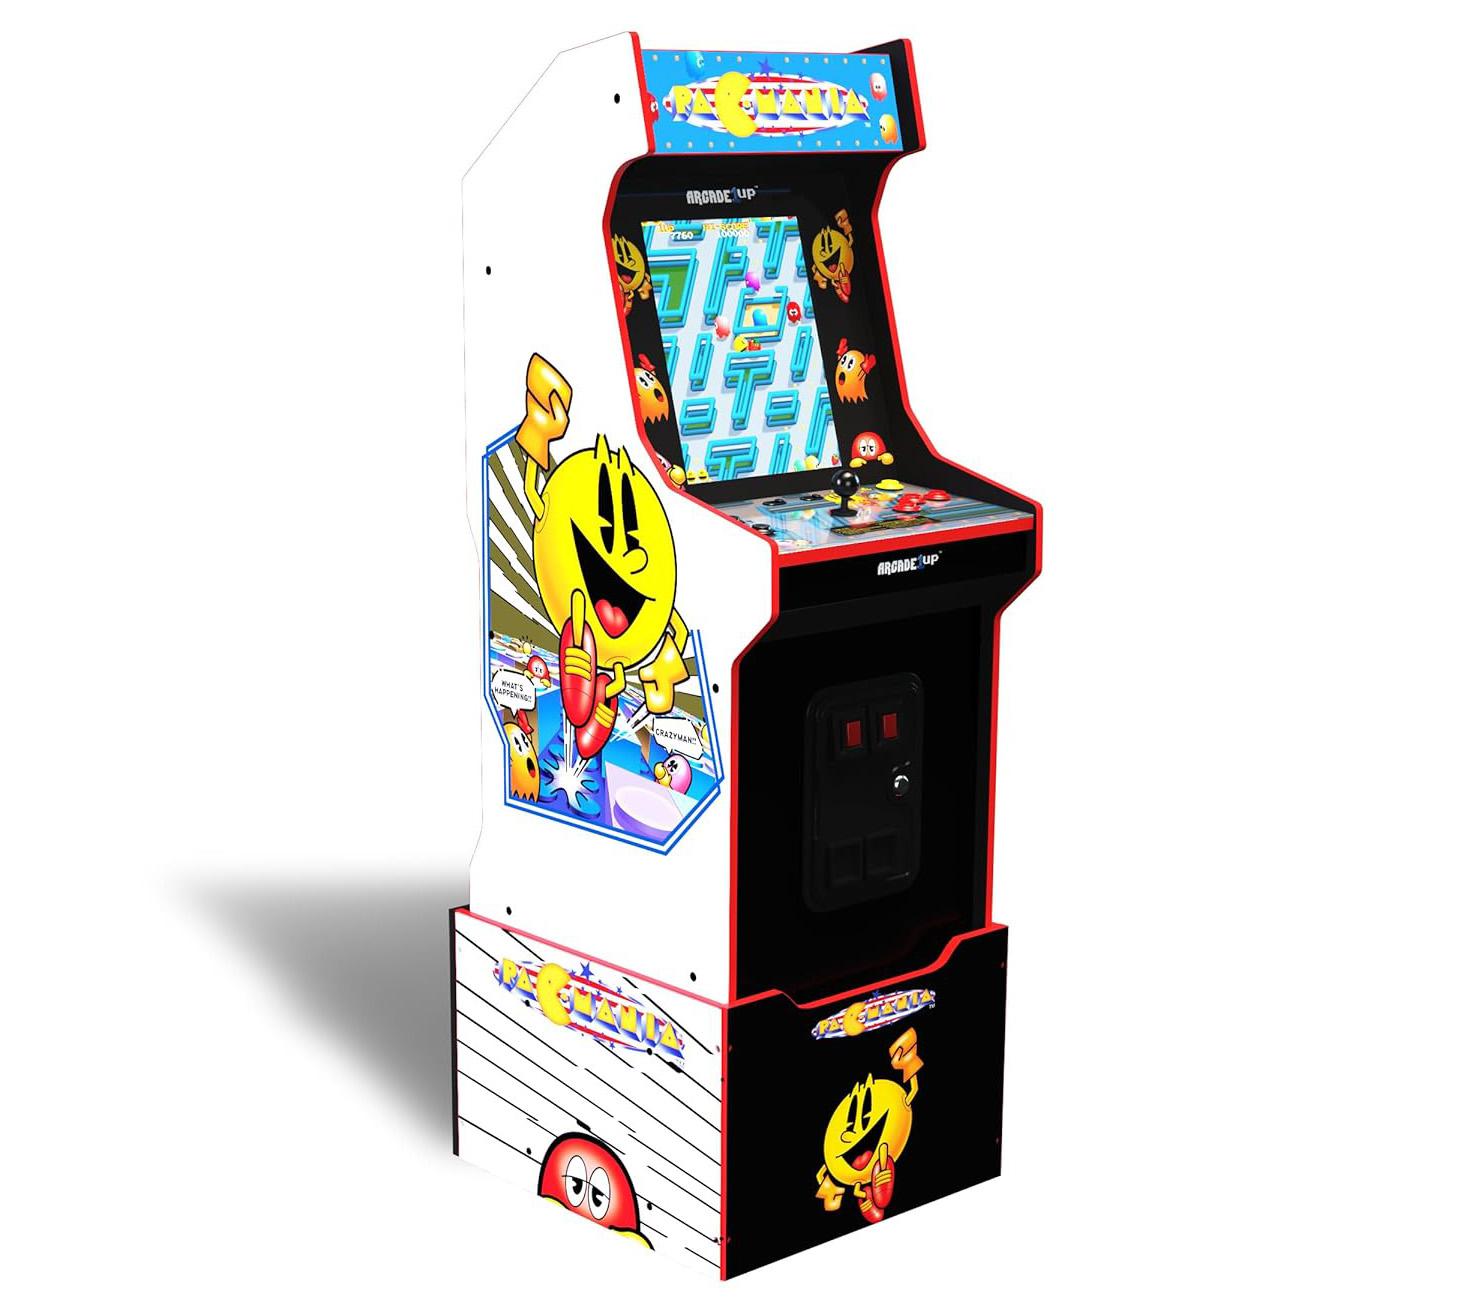 Arcade1up Pacmania Bandai Legacy Edition Arcade Cabinett for $299.99 Shipped